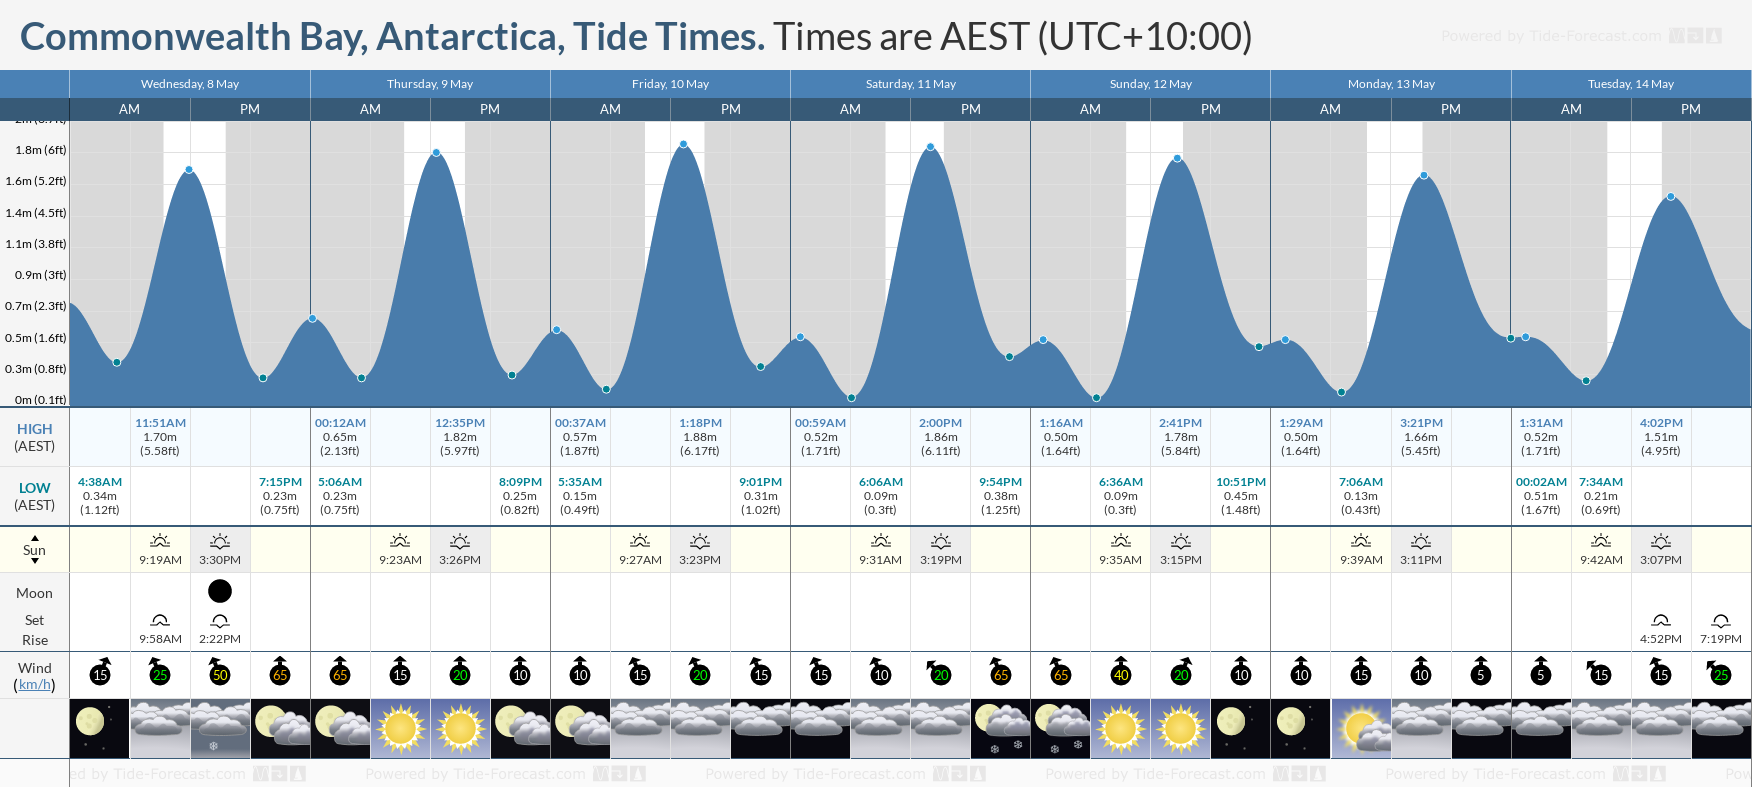 Commonwealth Bay, Antarctica Tide Chart including high and low tide tide times for the next 7 days